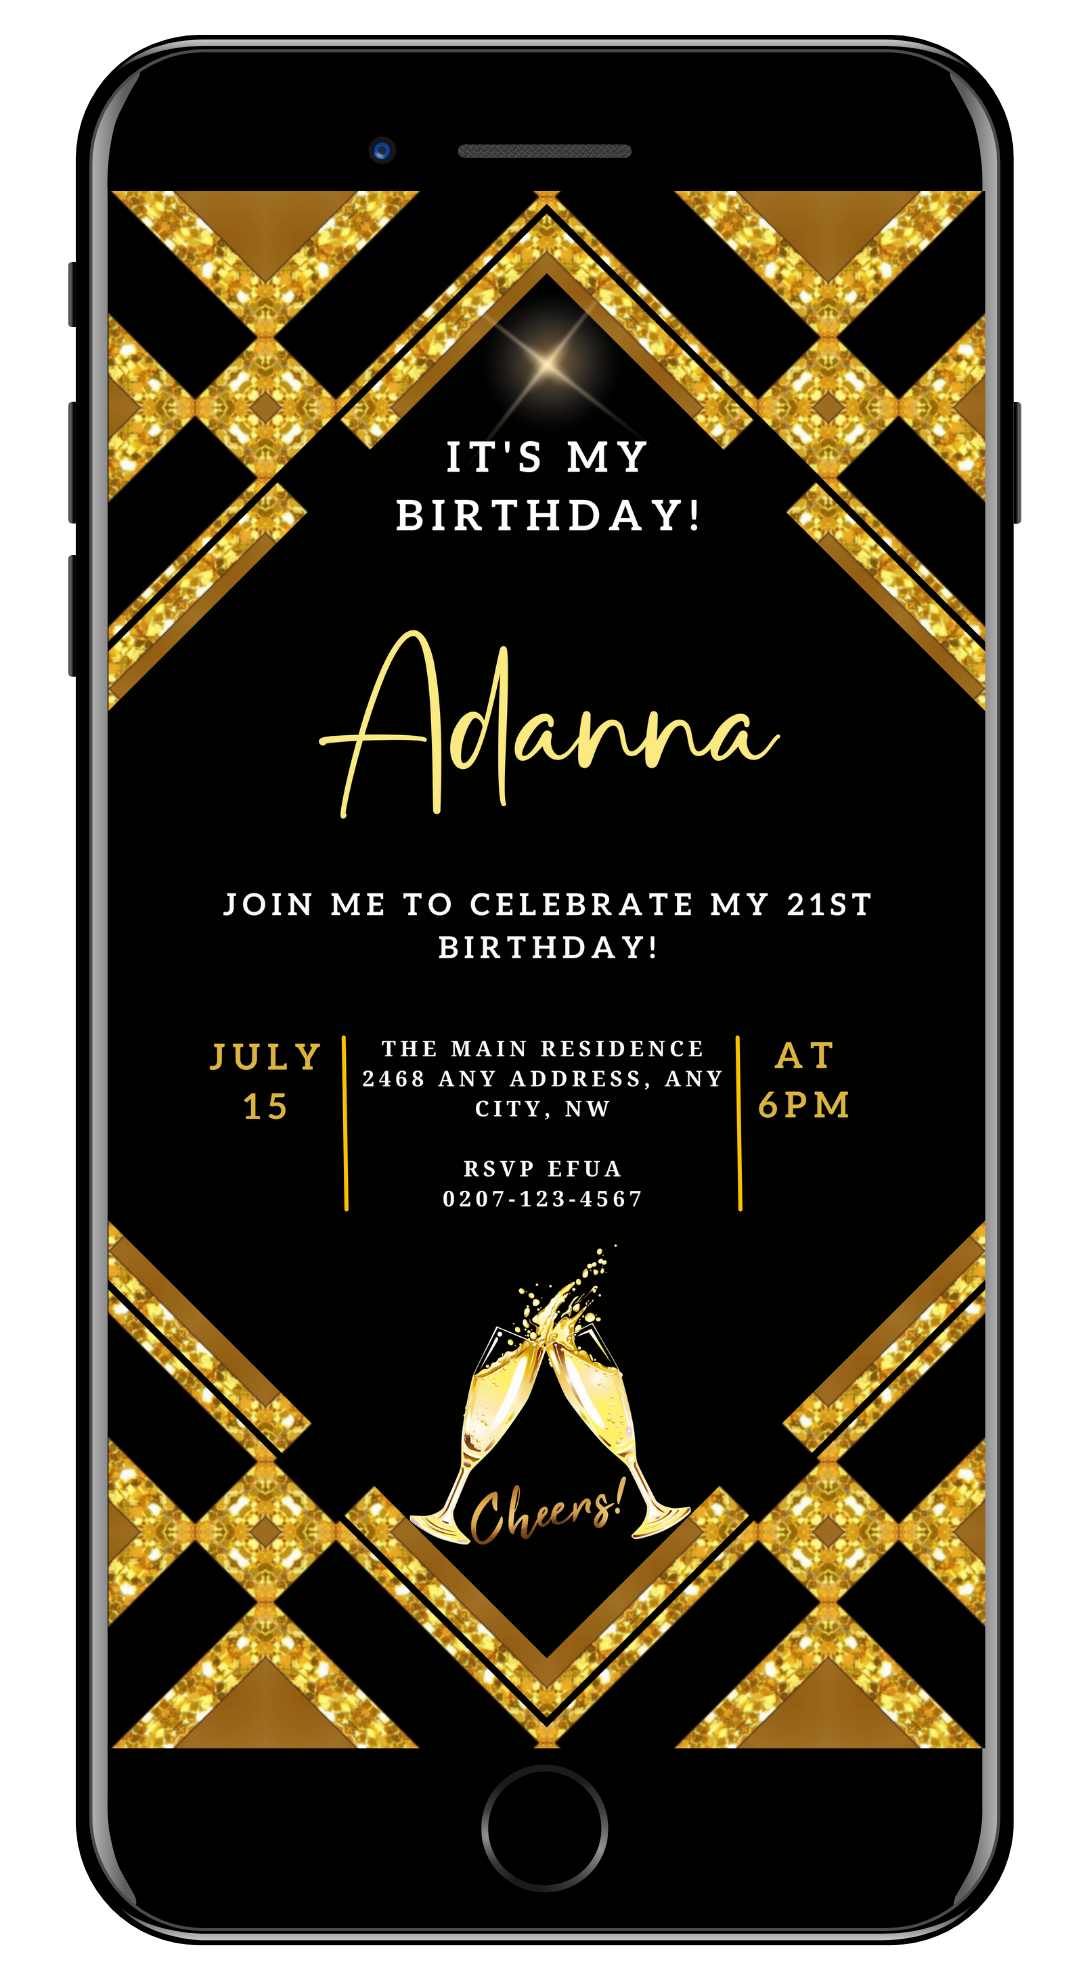 Gold Black Sparkle Customisable Birthday Evite featuring a black and gold design, editable text, and champagne glasses toasting, perfect for digital invitations via Canva.